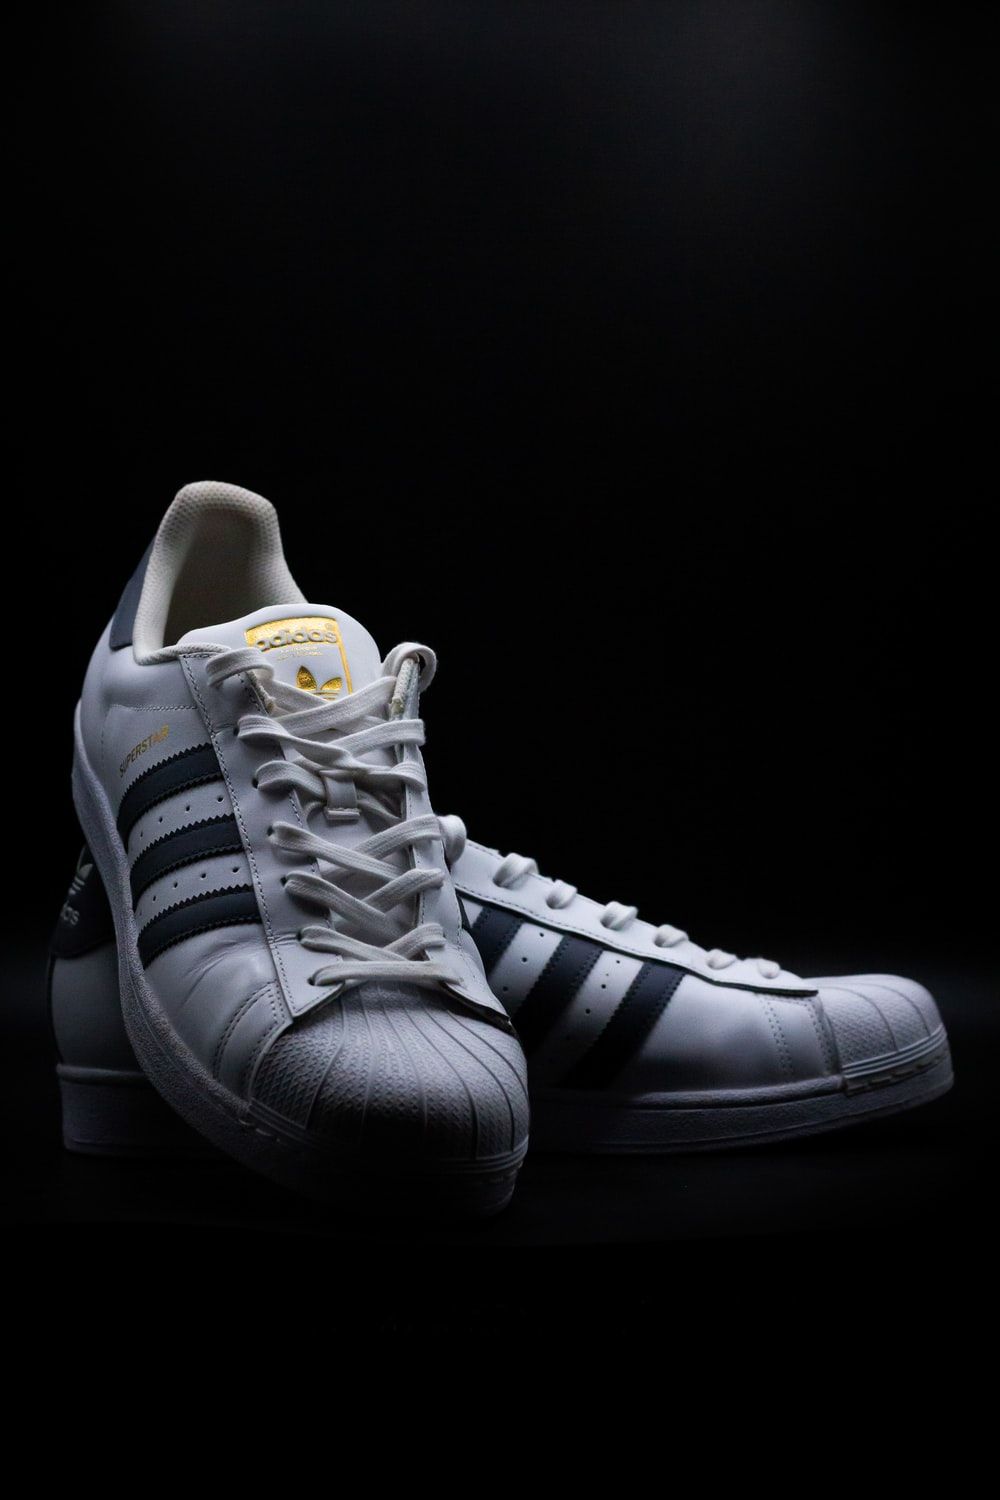 Adidas Shoe Picture. Download Free Image